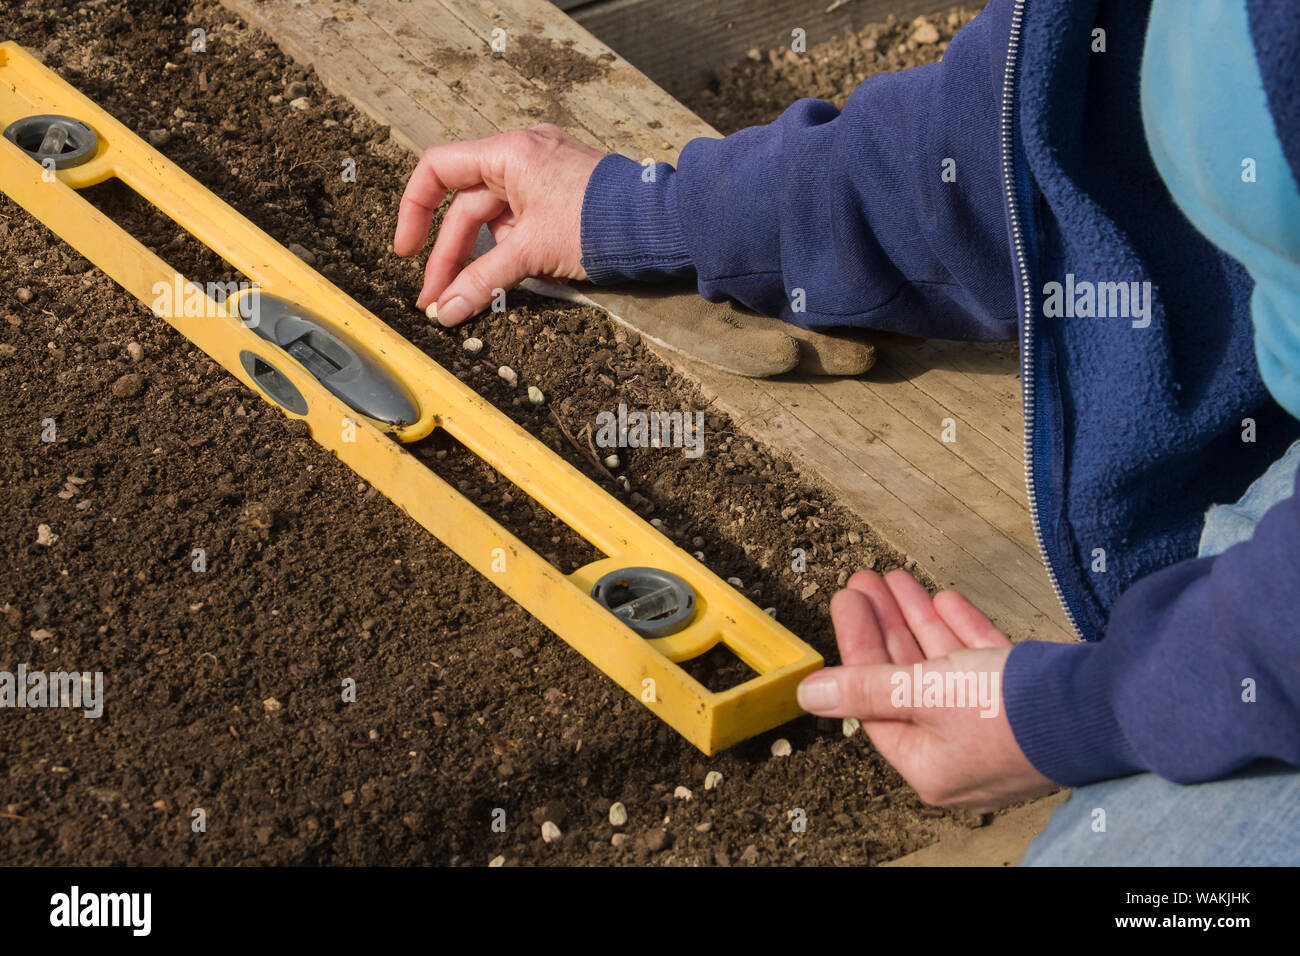 Sammamish, Washington State, USA. Woman planting snap pea seeds, measuring with a ruler on a level to get proper spacing. (MR, PR) Stock Photo